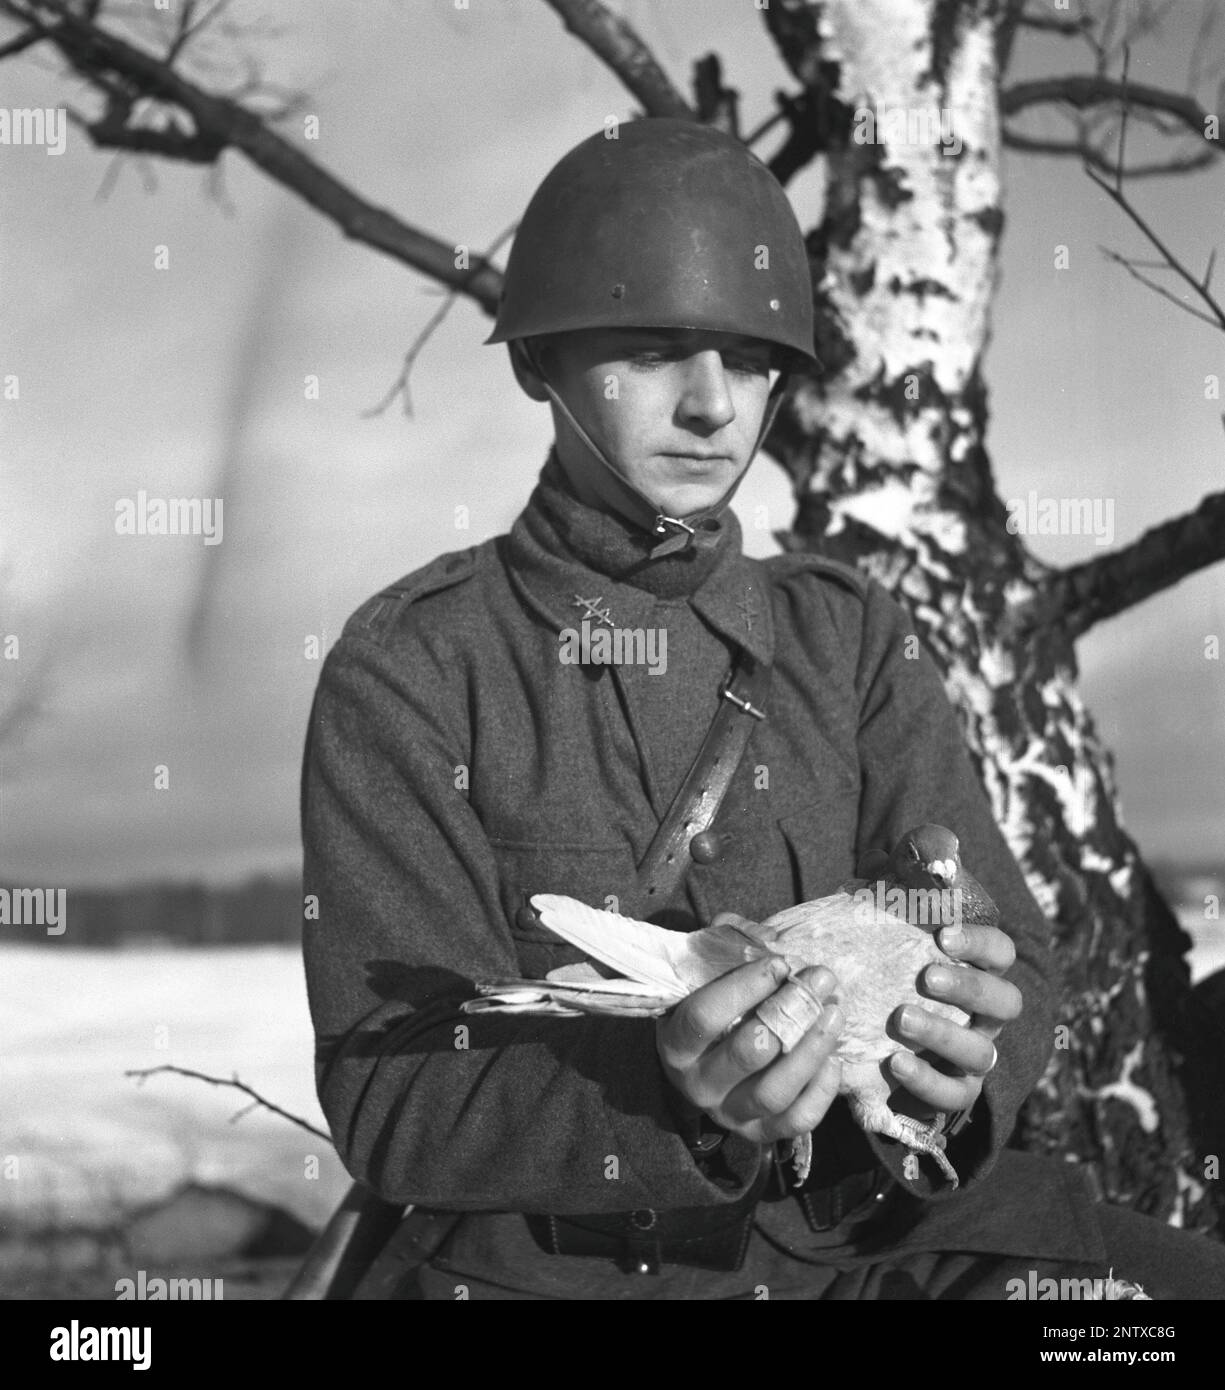 Swedish army during WW2. A soldier is seen holding a pigeon in his hands. War pigeons were used by the swedish military during World War II. The pigeons carried messages from one place to another often a piece of paper in a small metal container attached to it's leg. Homing pigeons were handled and trained by a special unit of swedish military. Homing pigeons played a vital part in the invasion of Normandy as radios could not be used for fear of vital information being intercepted by the enemy. Sweden december 1940. Kristoffersson ref 184-6 Stock Photo